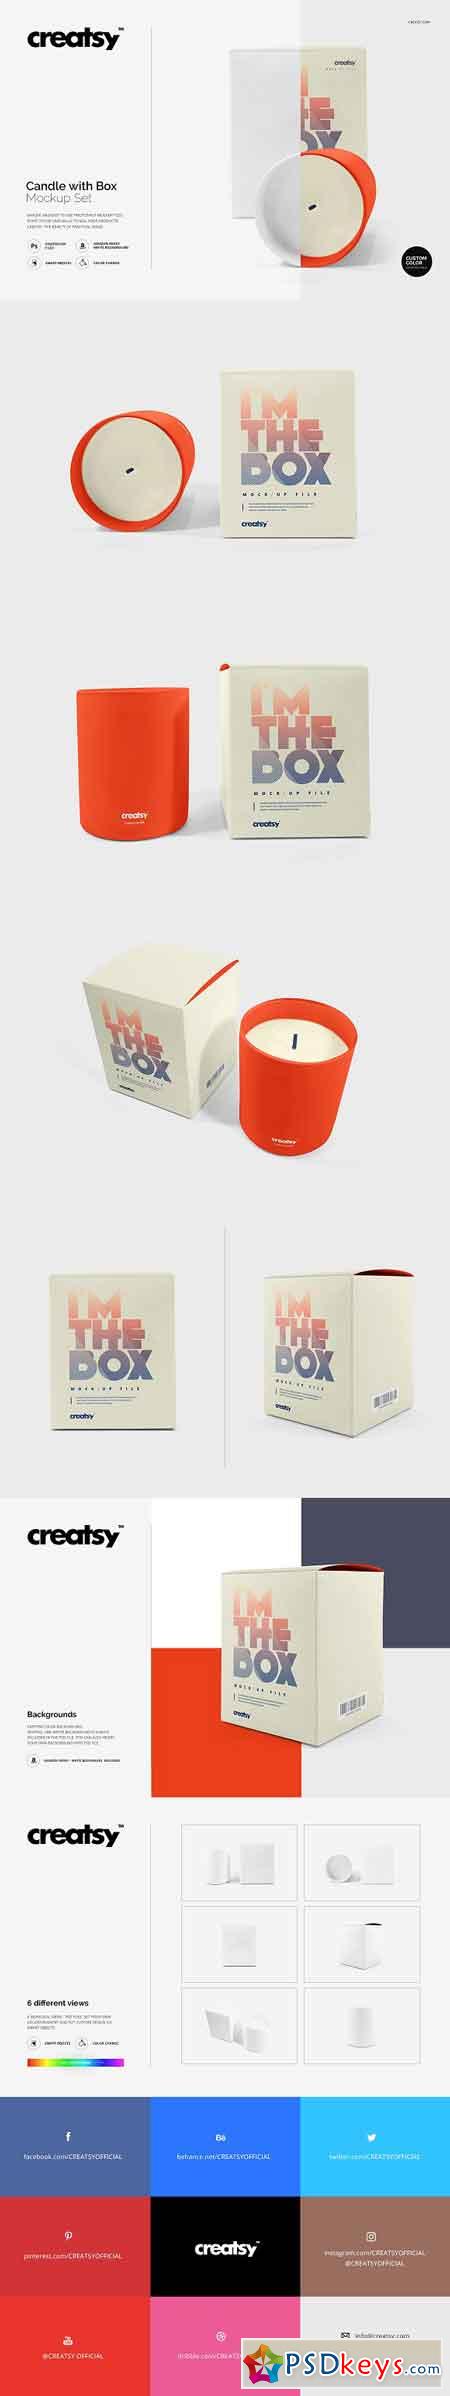 Candle with Box Mockup 1152465